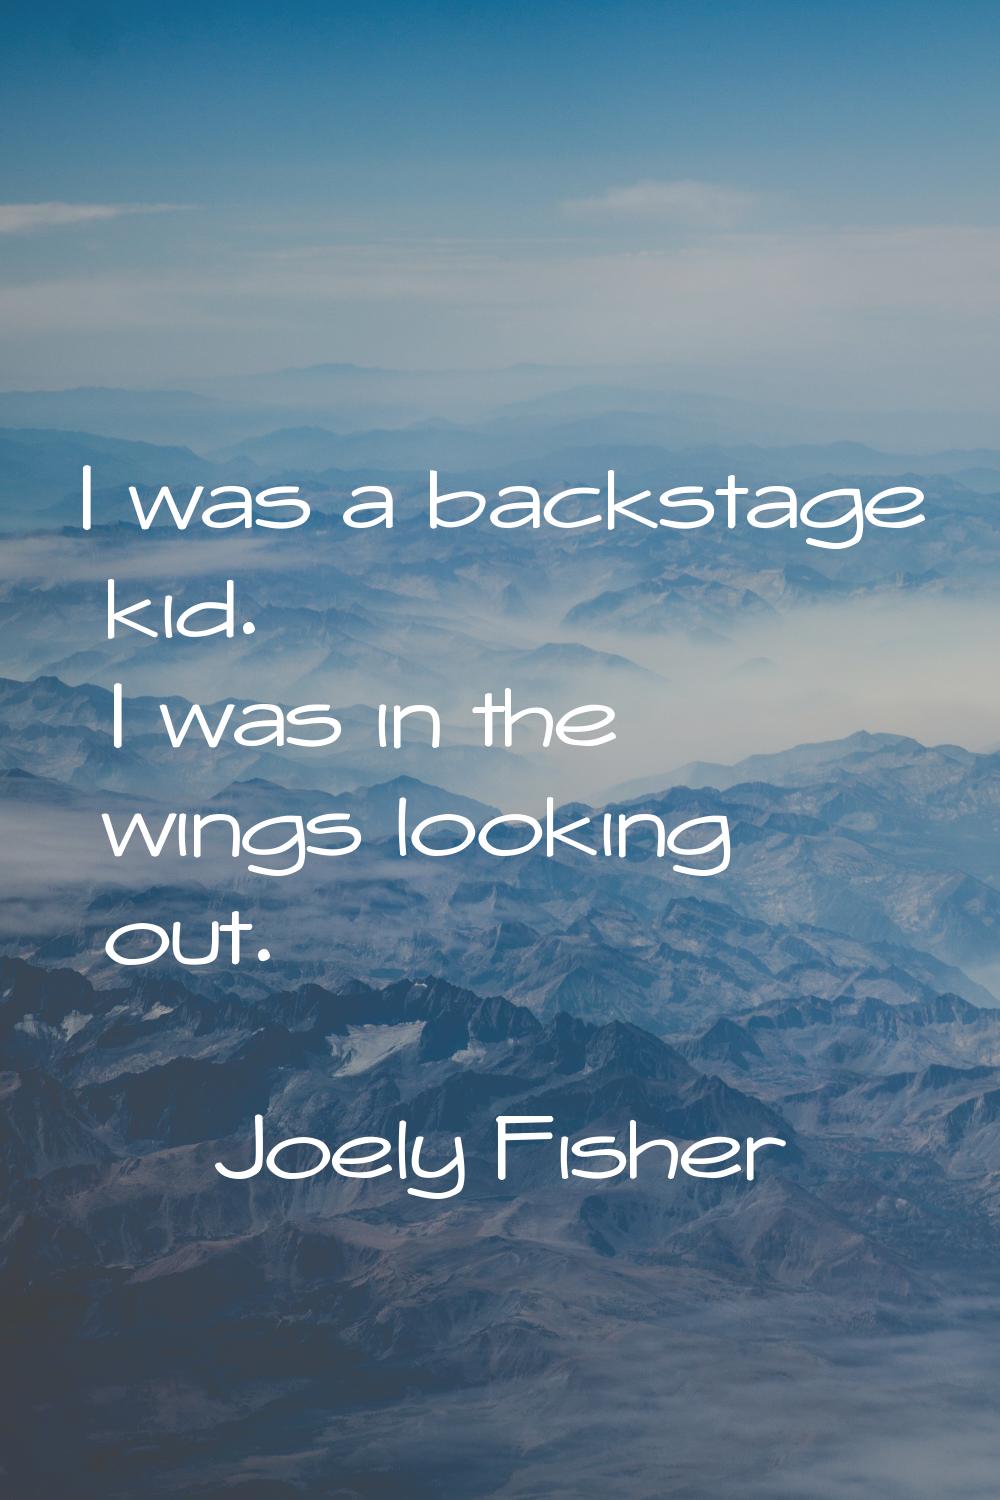 I was a backstage kid. I was in the wings looking out.